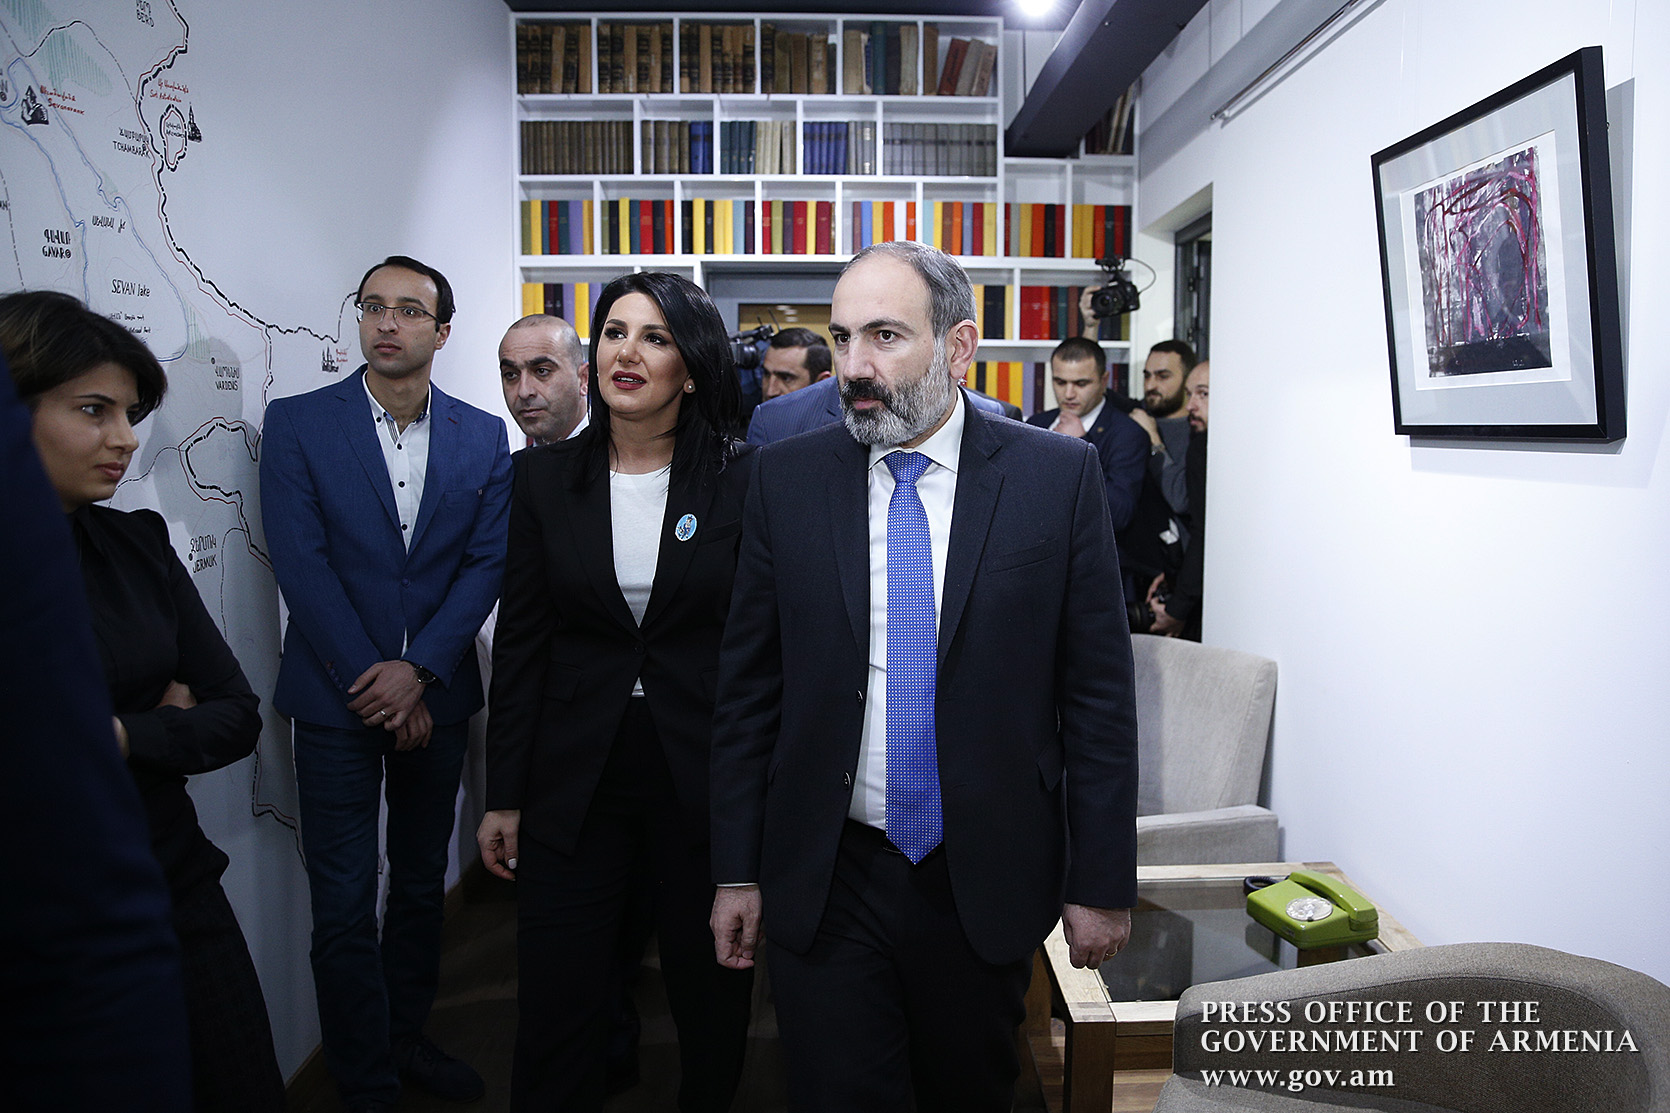 ‘The Other Side of the Country’ became the main motive for action’ – Nikol Pashinyan attends discussion on his book